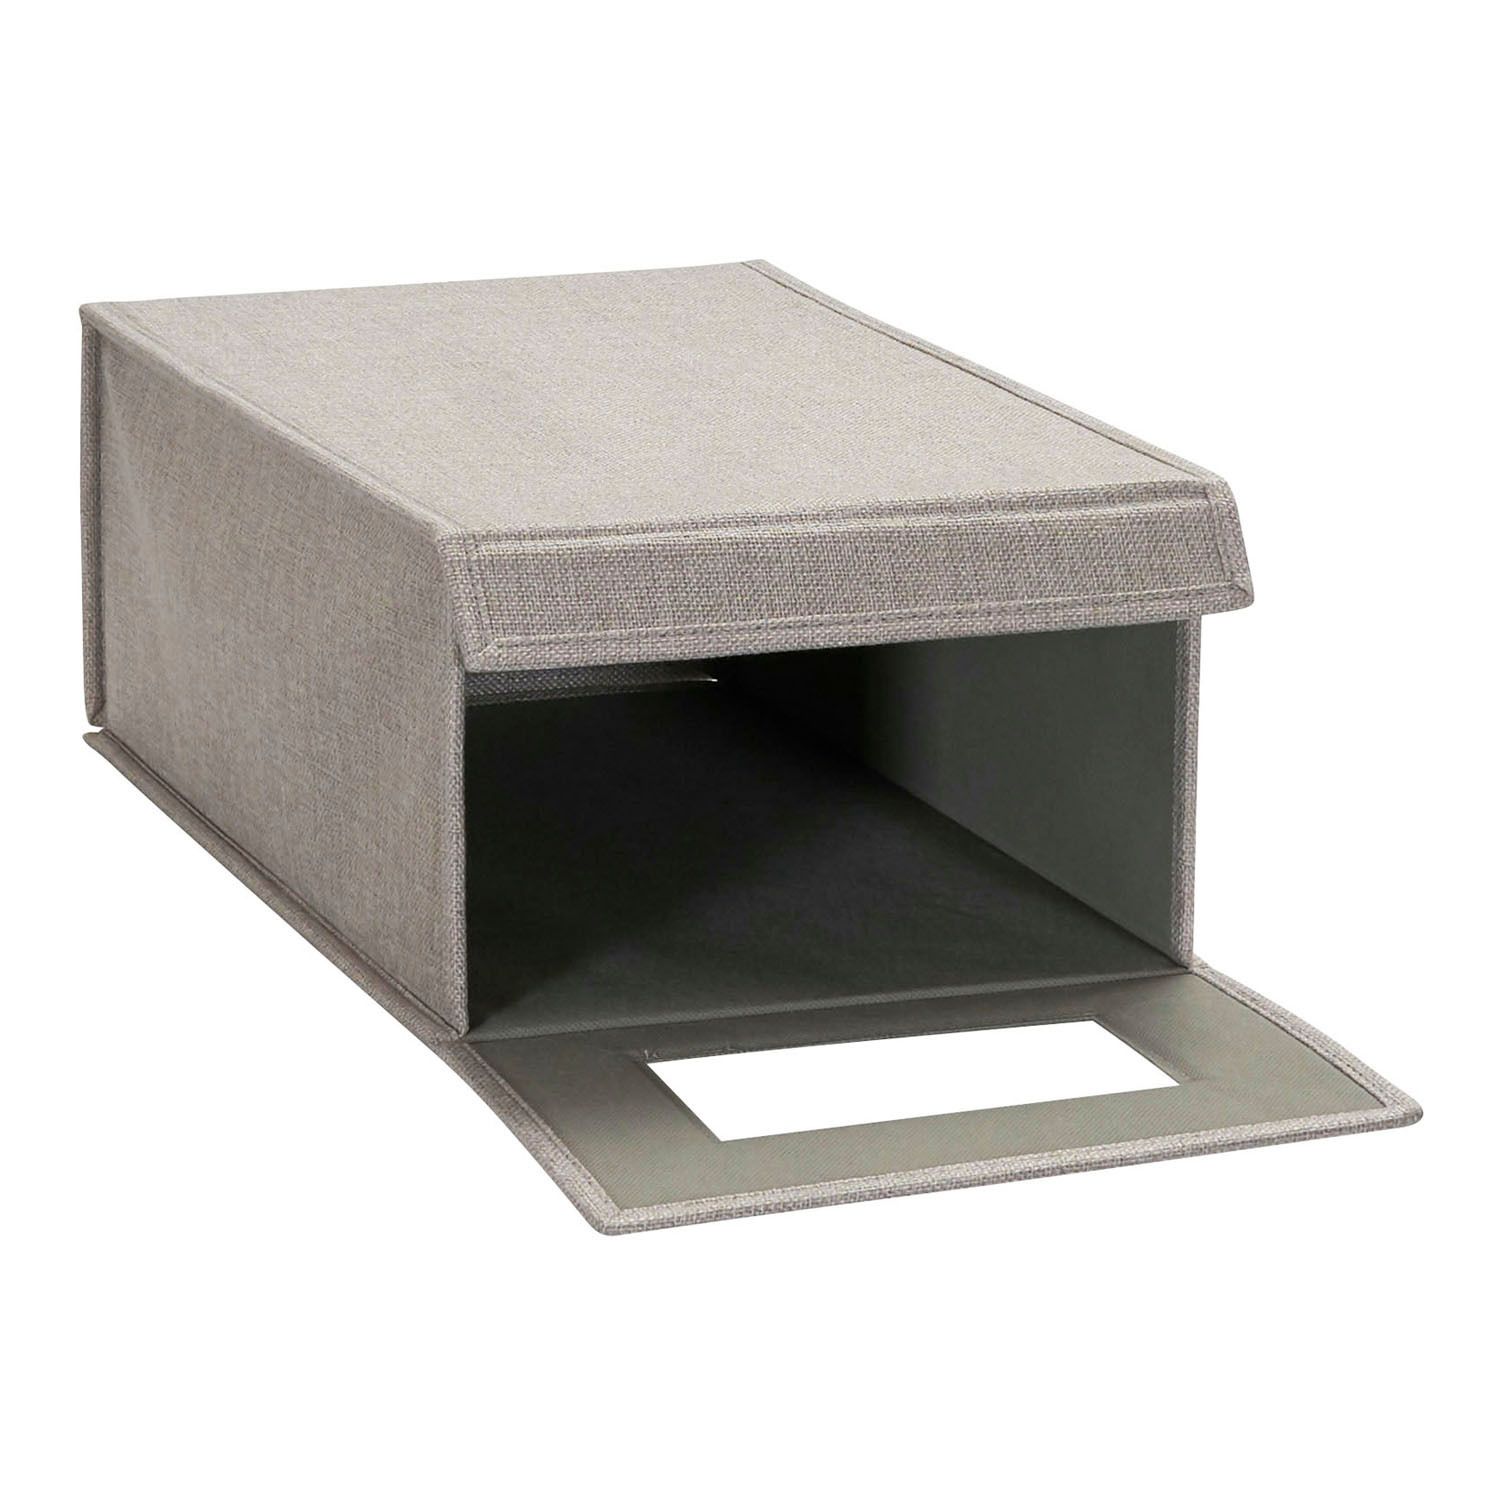 Image for Household Essentials 2-piece Large Drop Front Shoe Box at Kohl's.